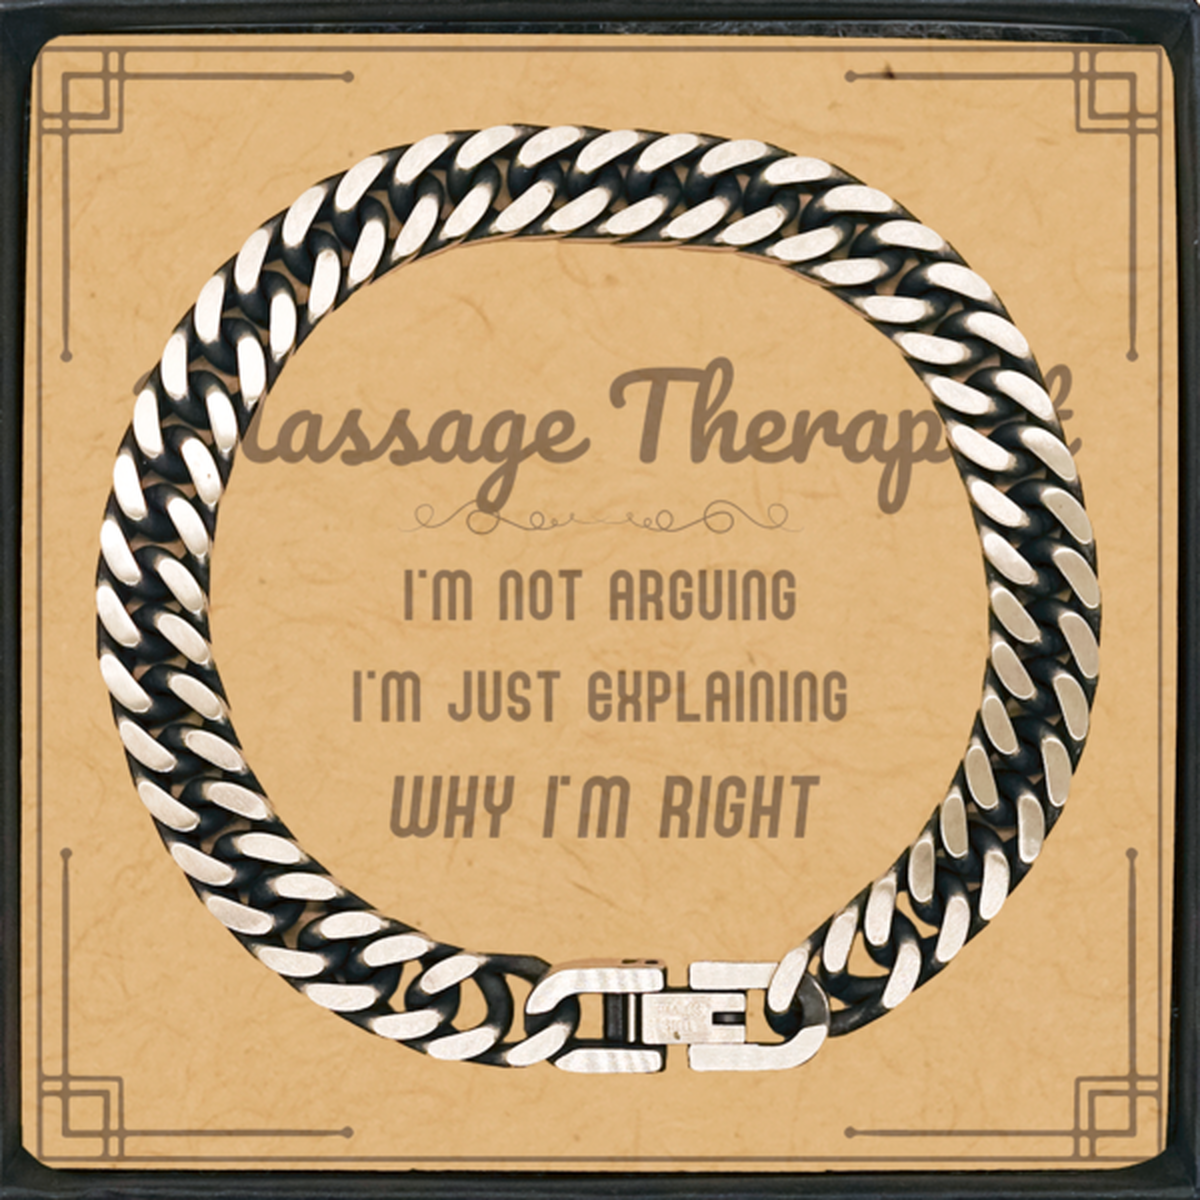 Massage Therapist I'm not Arguing. I'm Just Explaining Why I'm RIGHT Cuban Link Chain Bracelet, Funny Saying Quote Massage Therapist Gifts For Massage Therapist Message Card Graduation Birthday Christmas Gifts for Men Women Coworker